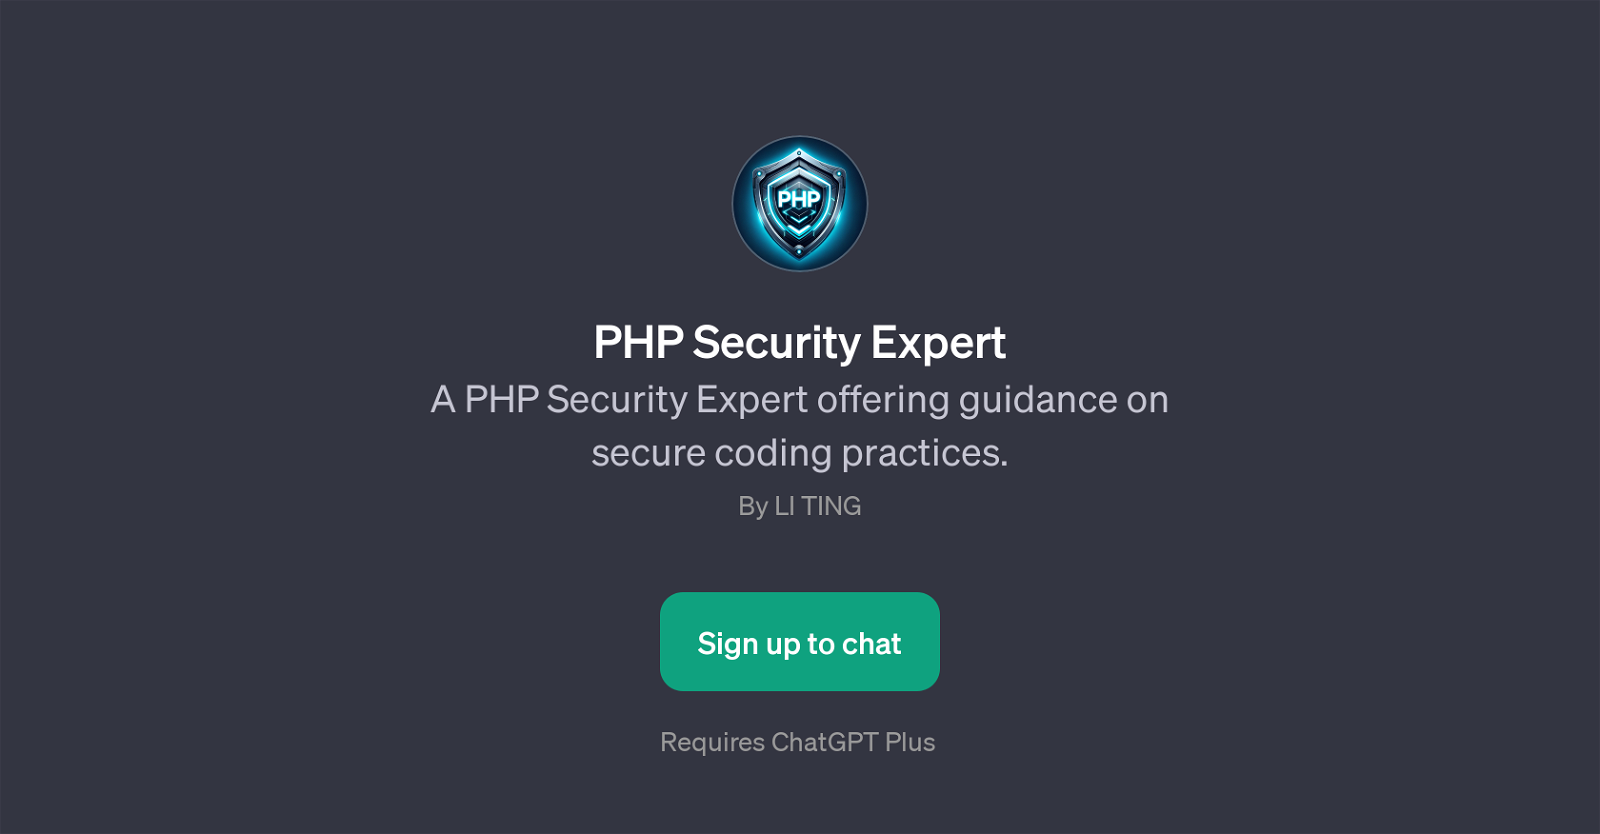 PHP Security Expert website